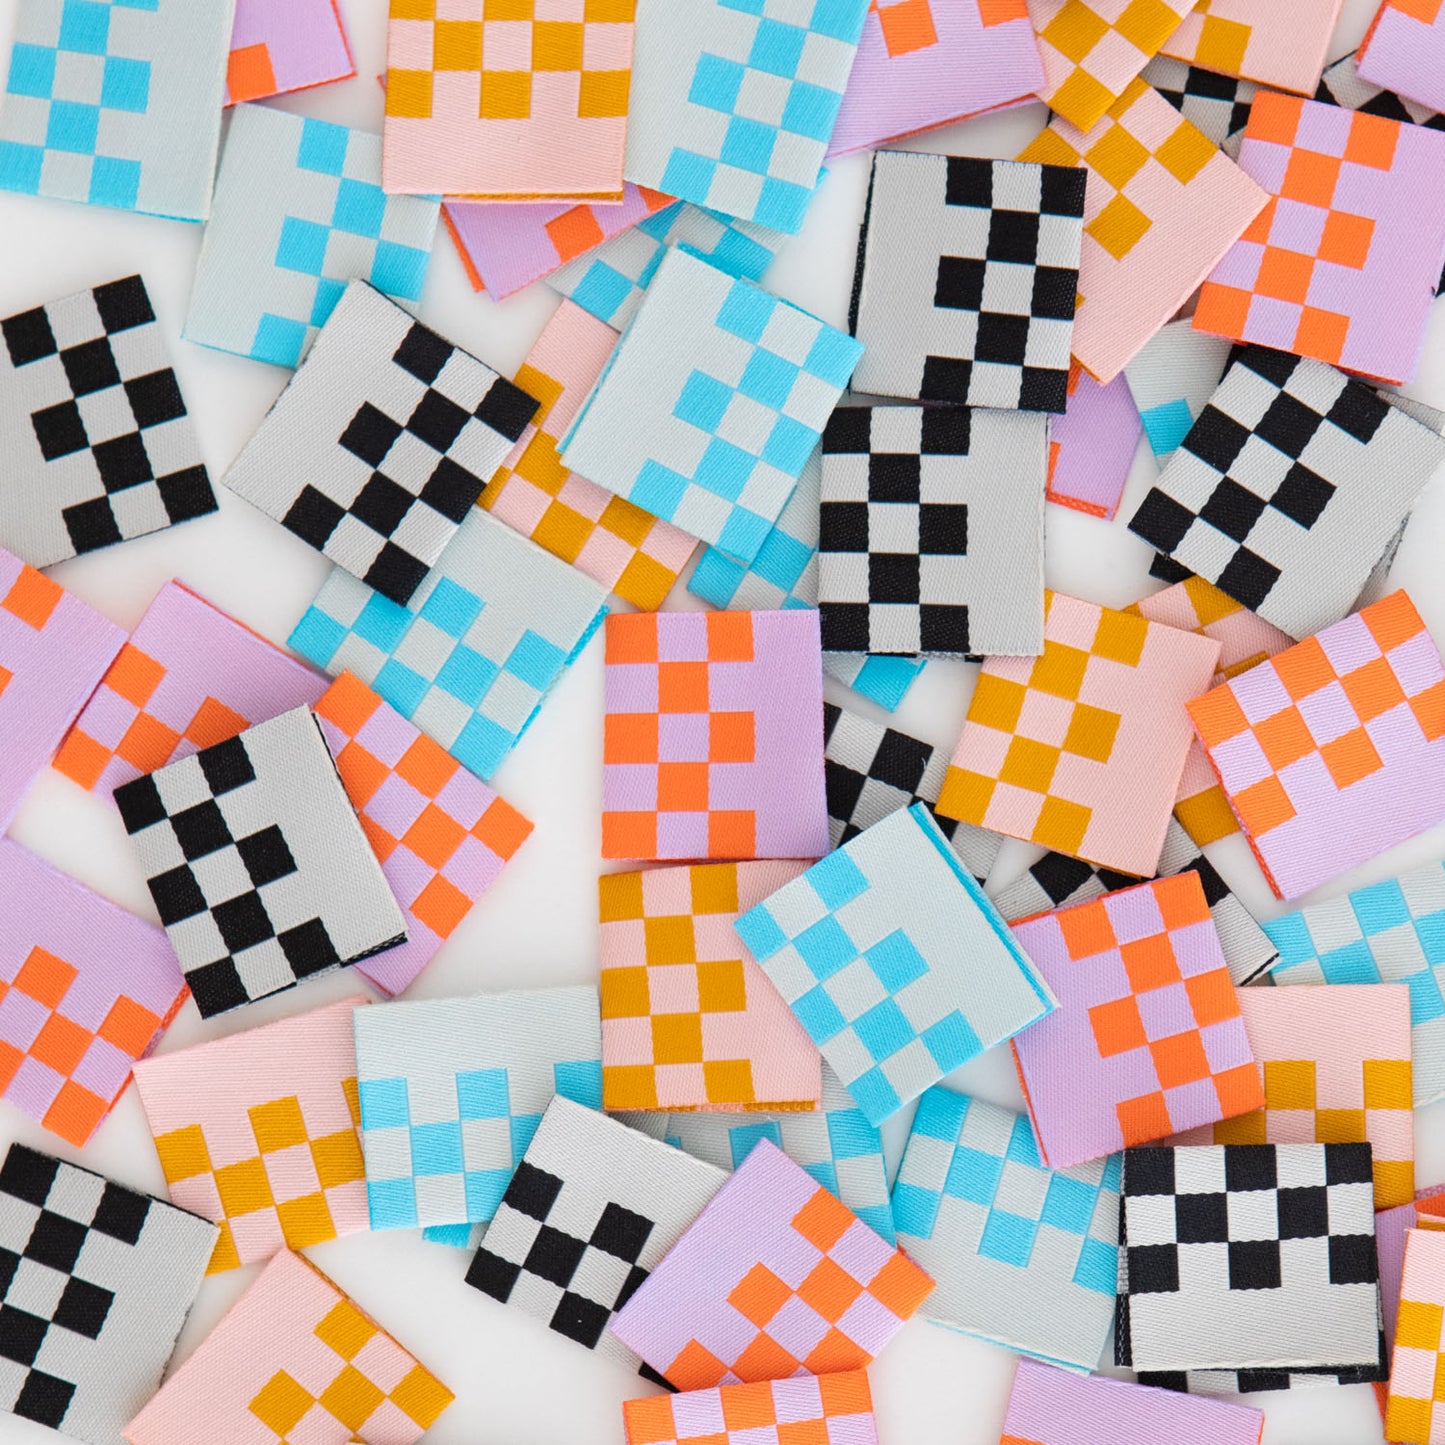 Checkerboard Multipack Woven Labels